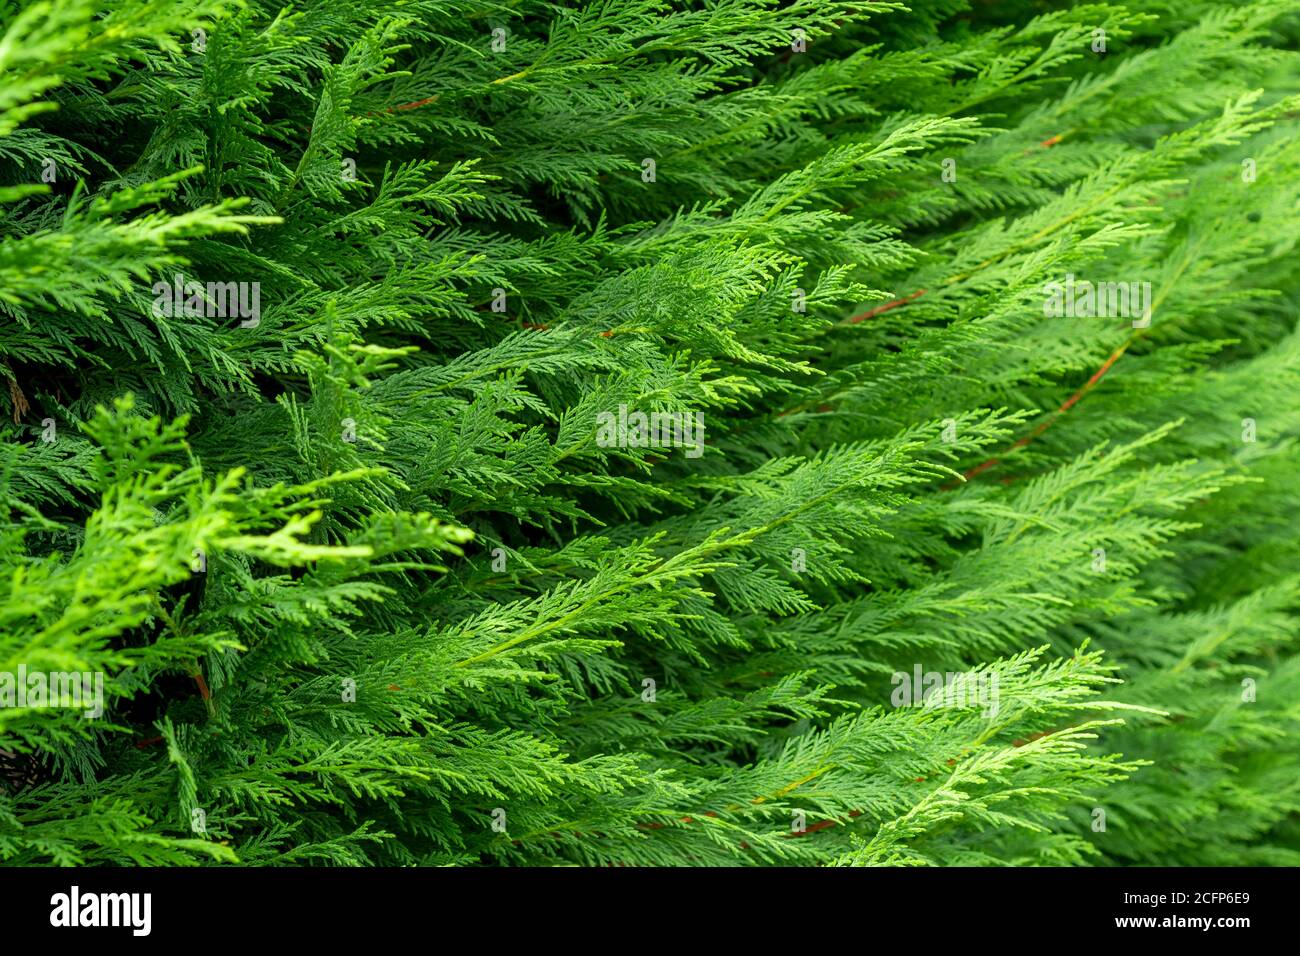 Beautiful green foliage on a thuja branch. Hedge. Blurred background. Selective focus. Cedar in a landscaped garden. Stock Photo